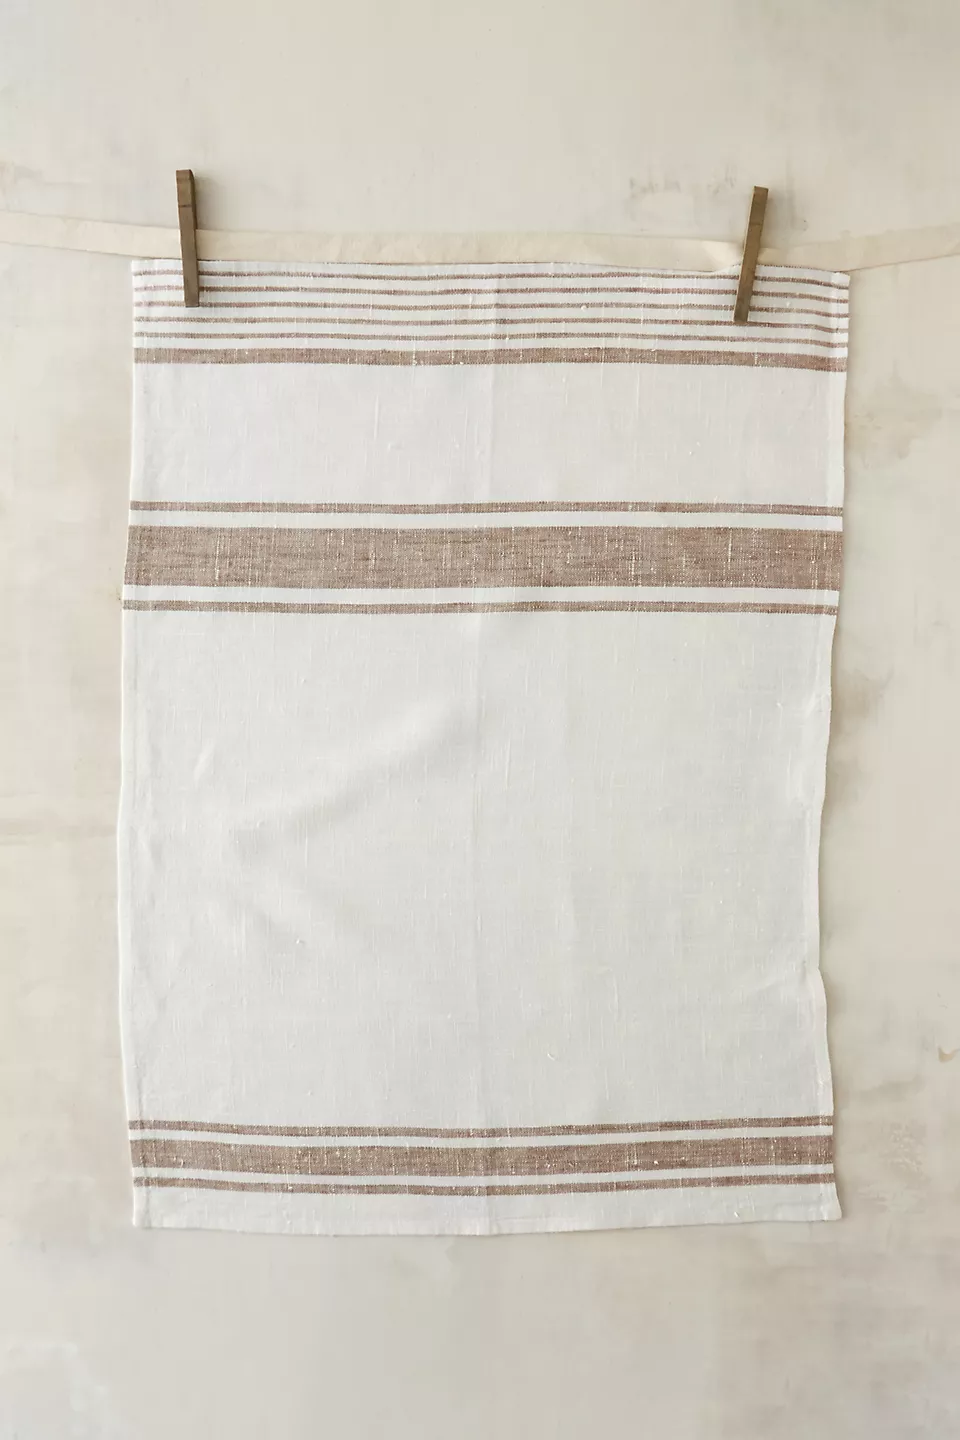 Shop Lithuanian Linen Dish Towel from Anthropologie on Openhaus